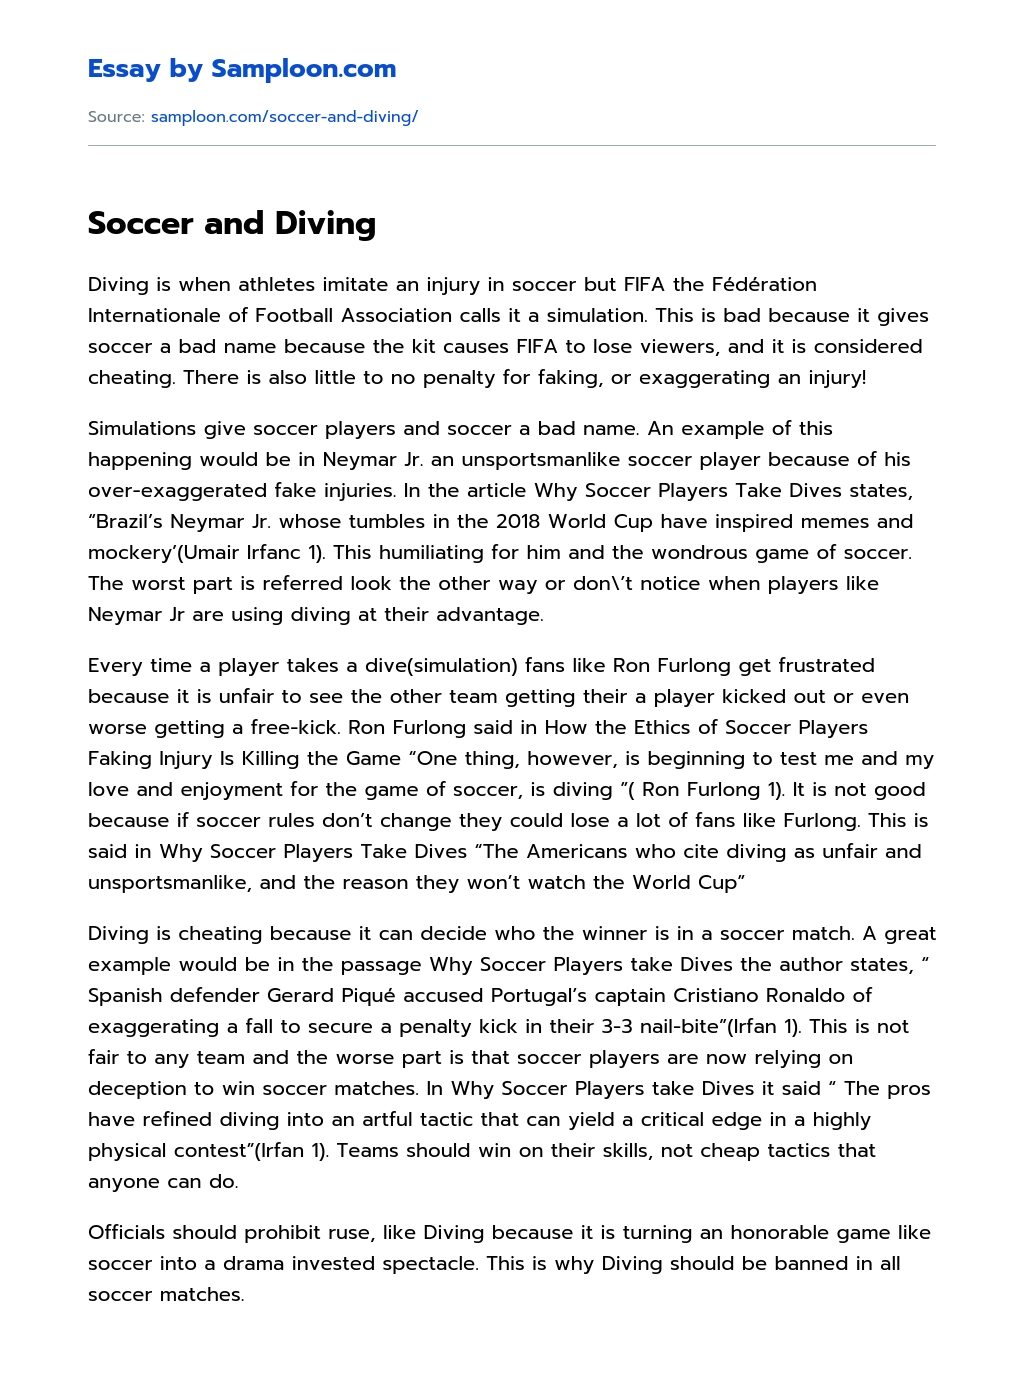 Soccer and Diving essay